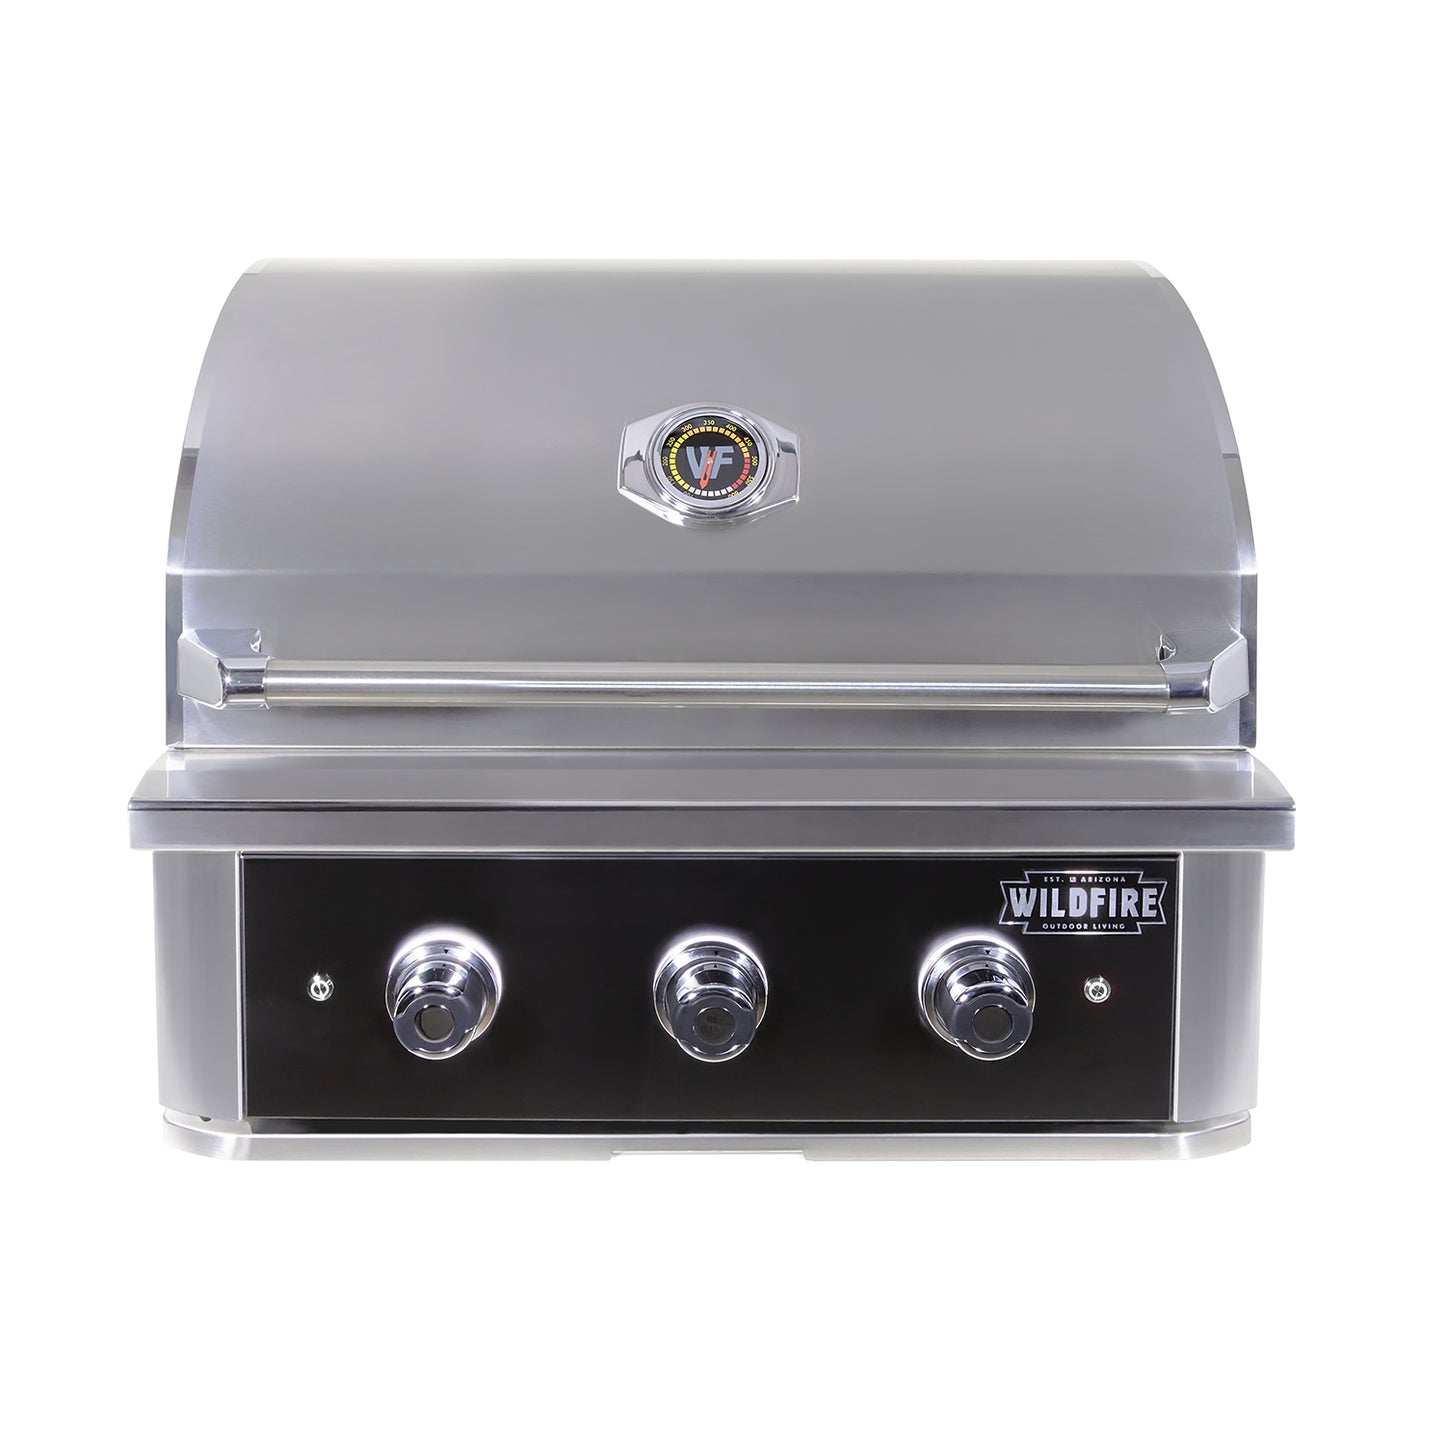 Wildfire Ranch Pro 30" Gas Grill